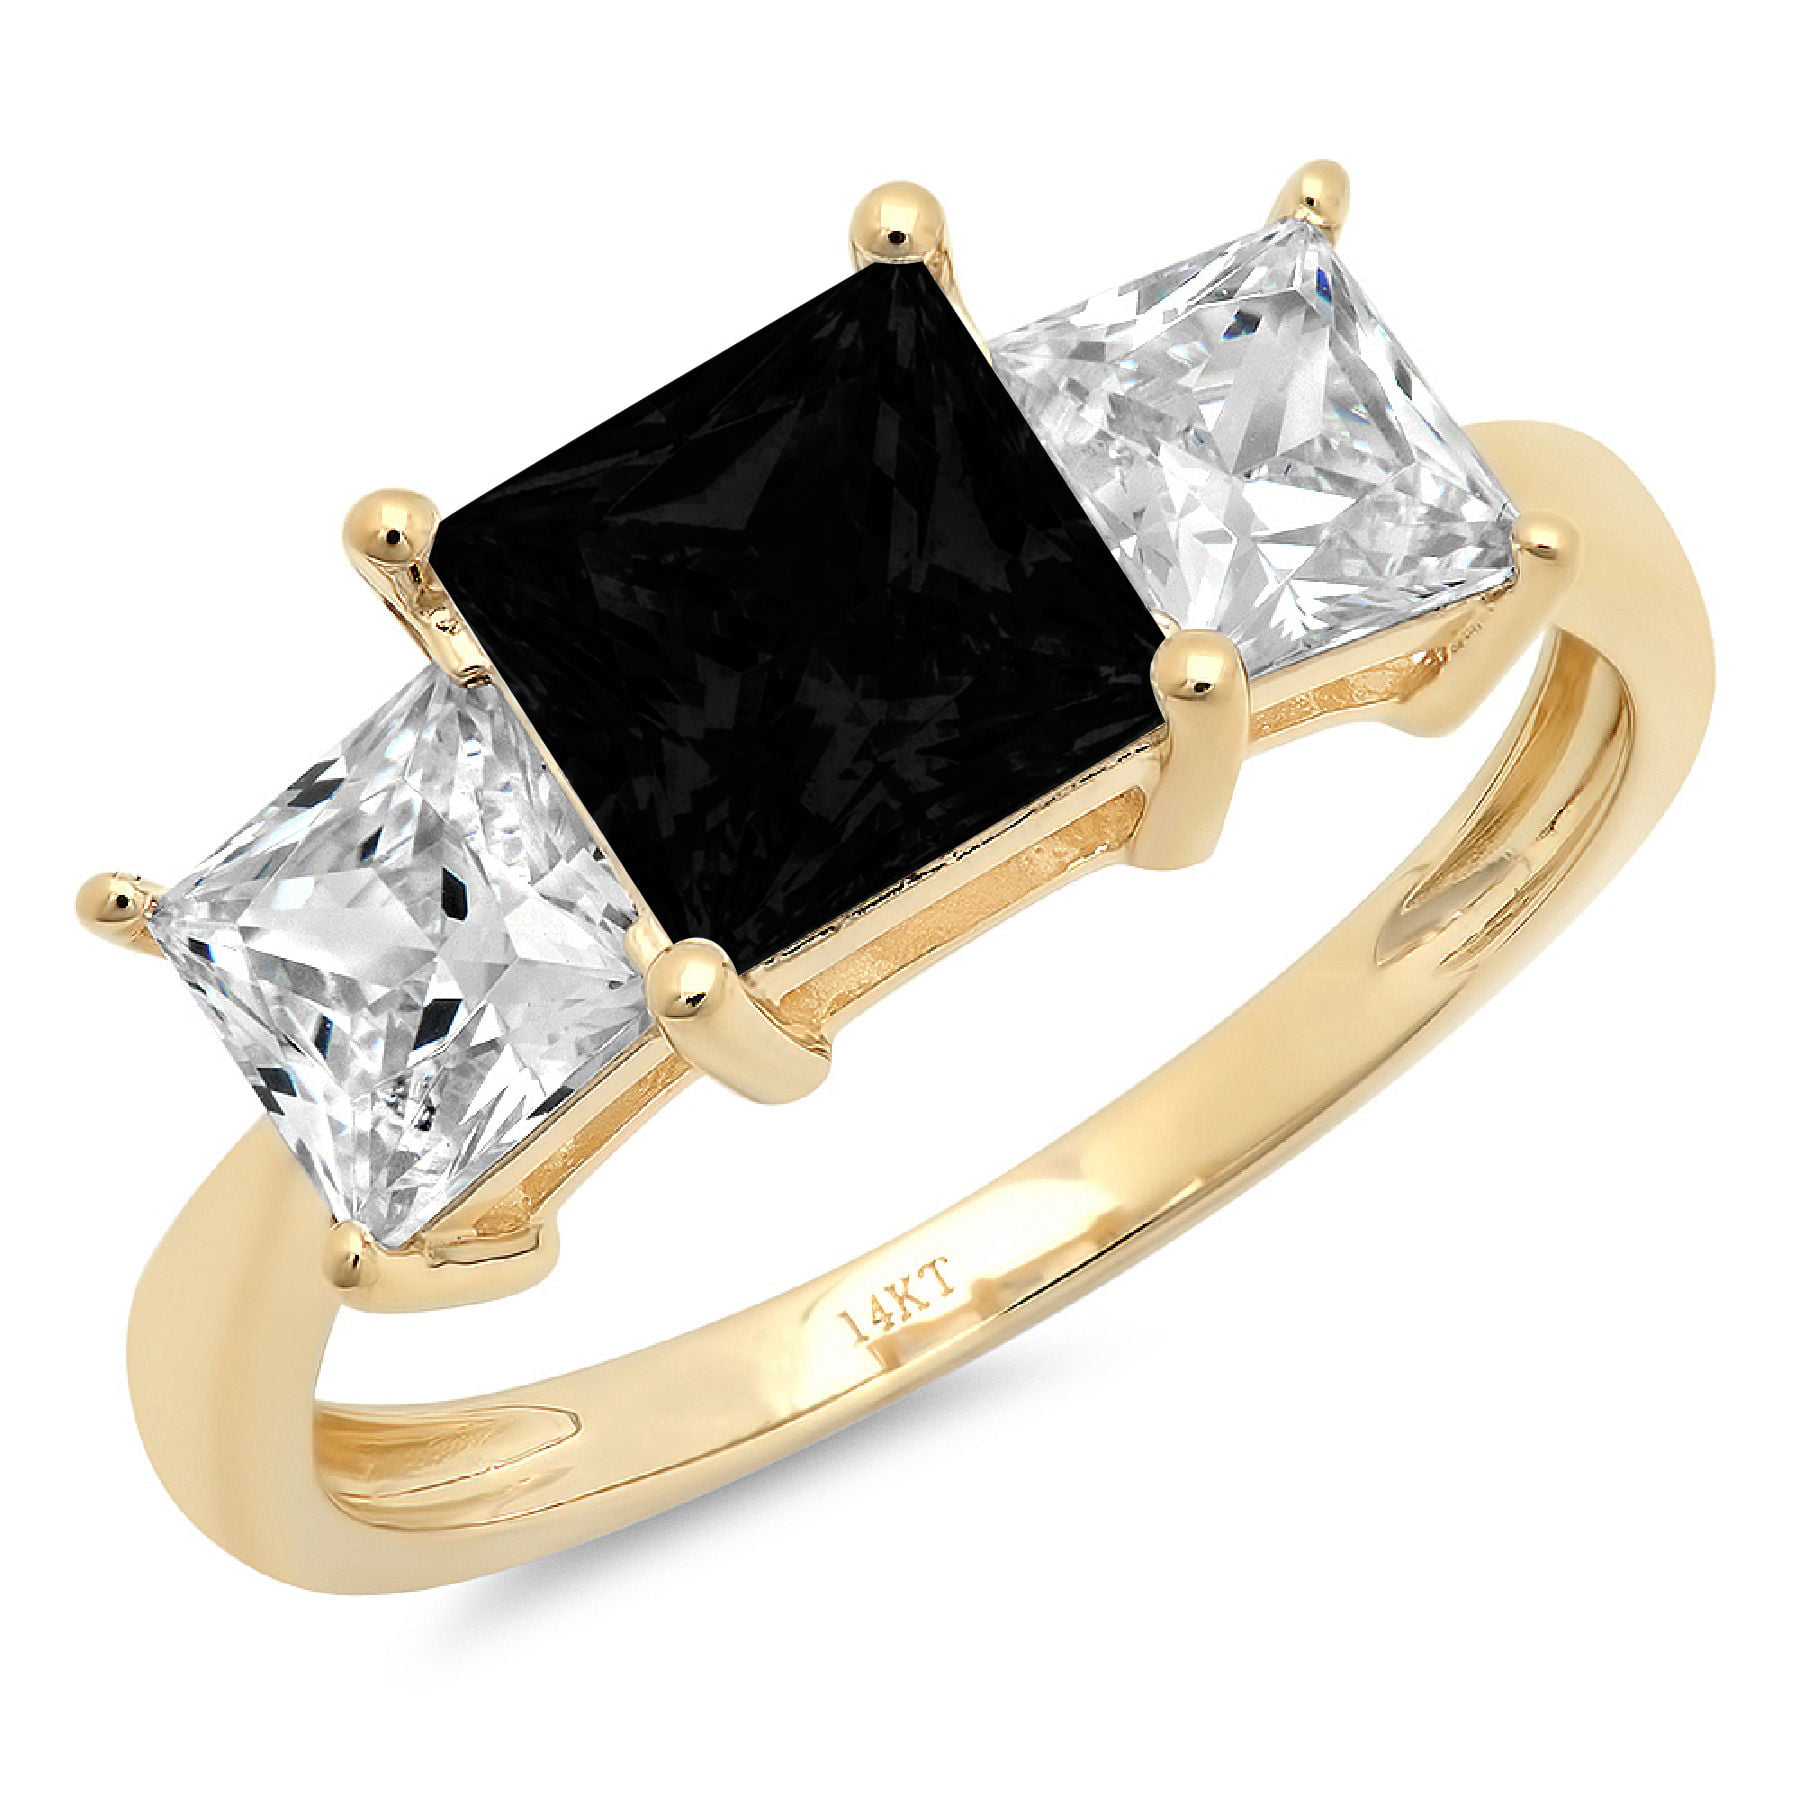 1.5 ct Brilliant Princess Cut VVS1 Natural Onyx White Solid 14k or 18k Gold Robotic Laser Engraved Handmade Anniversary Solitaire Ring